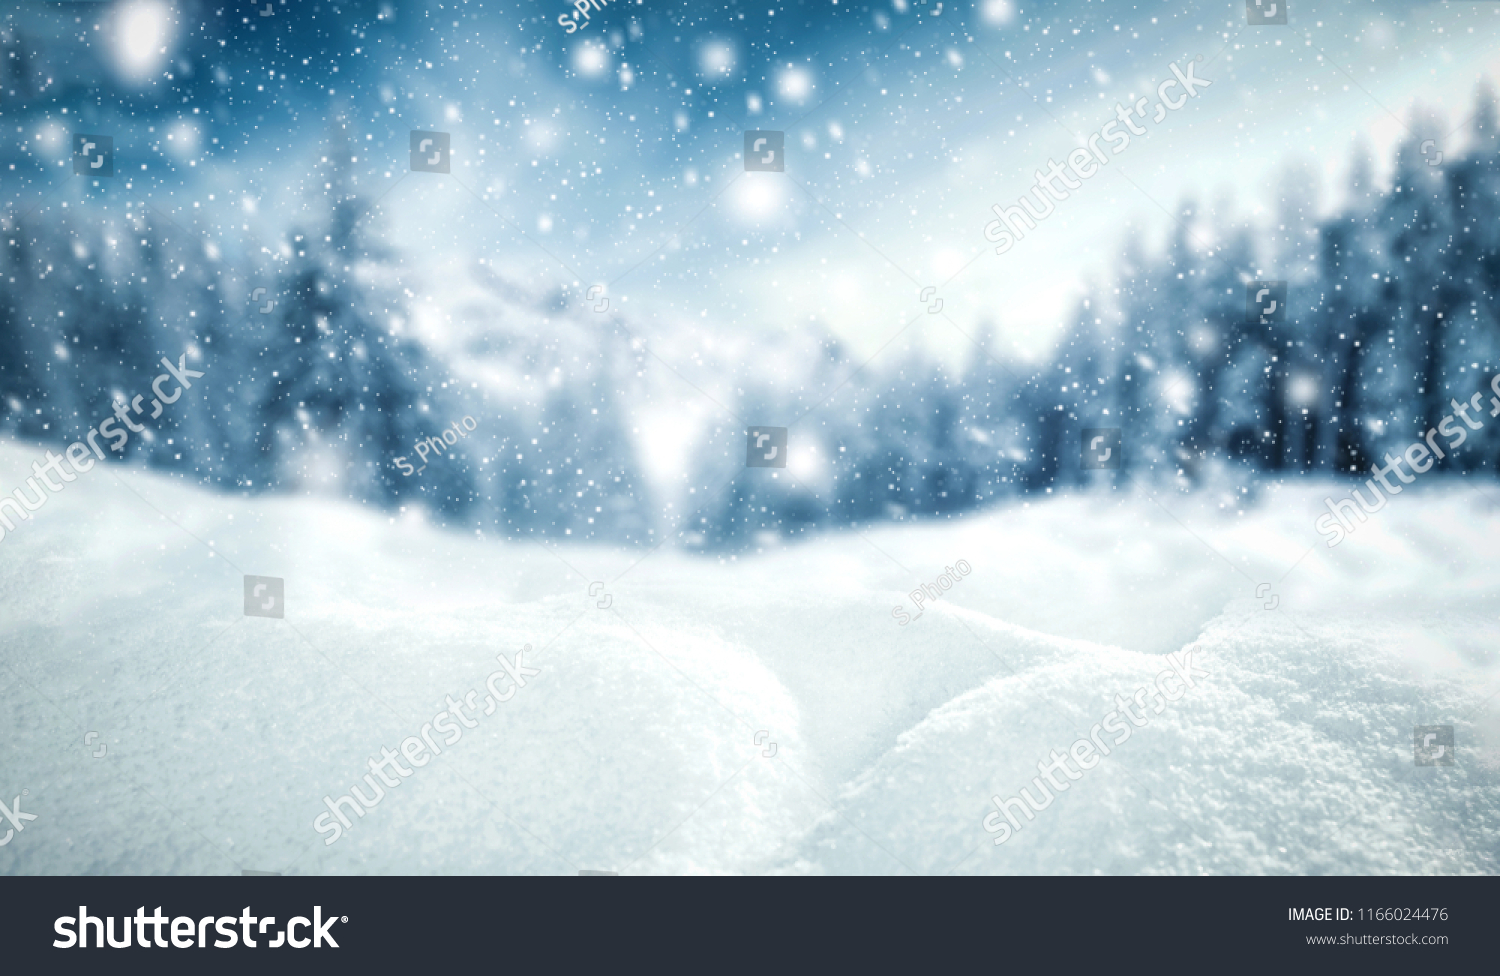 Winter background of snow and frost with free space for your decoration.  #1166024476